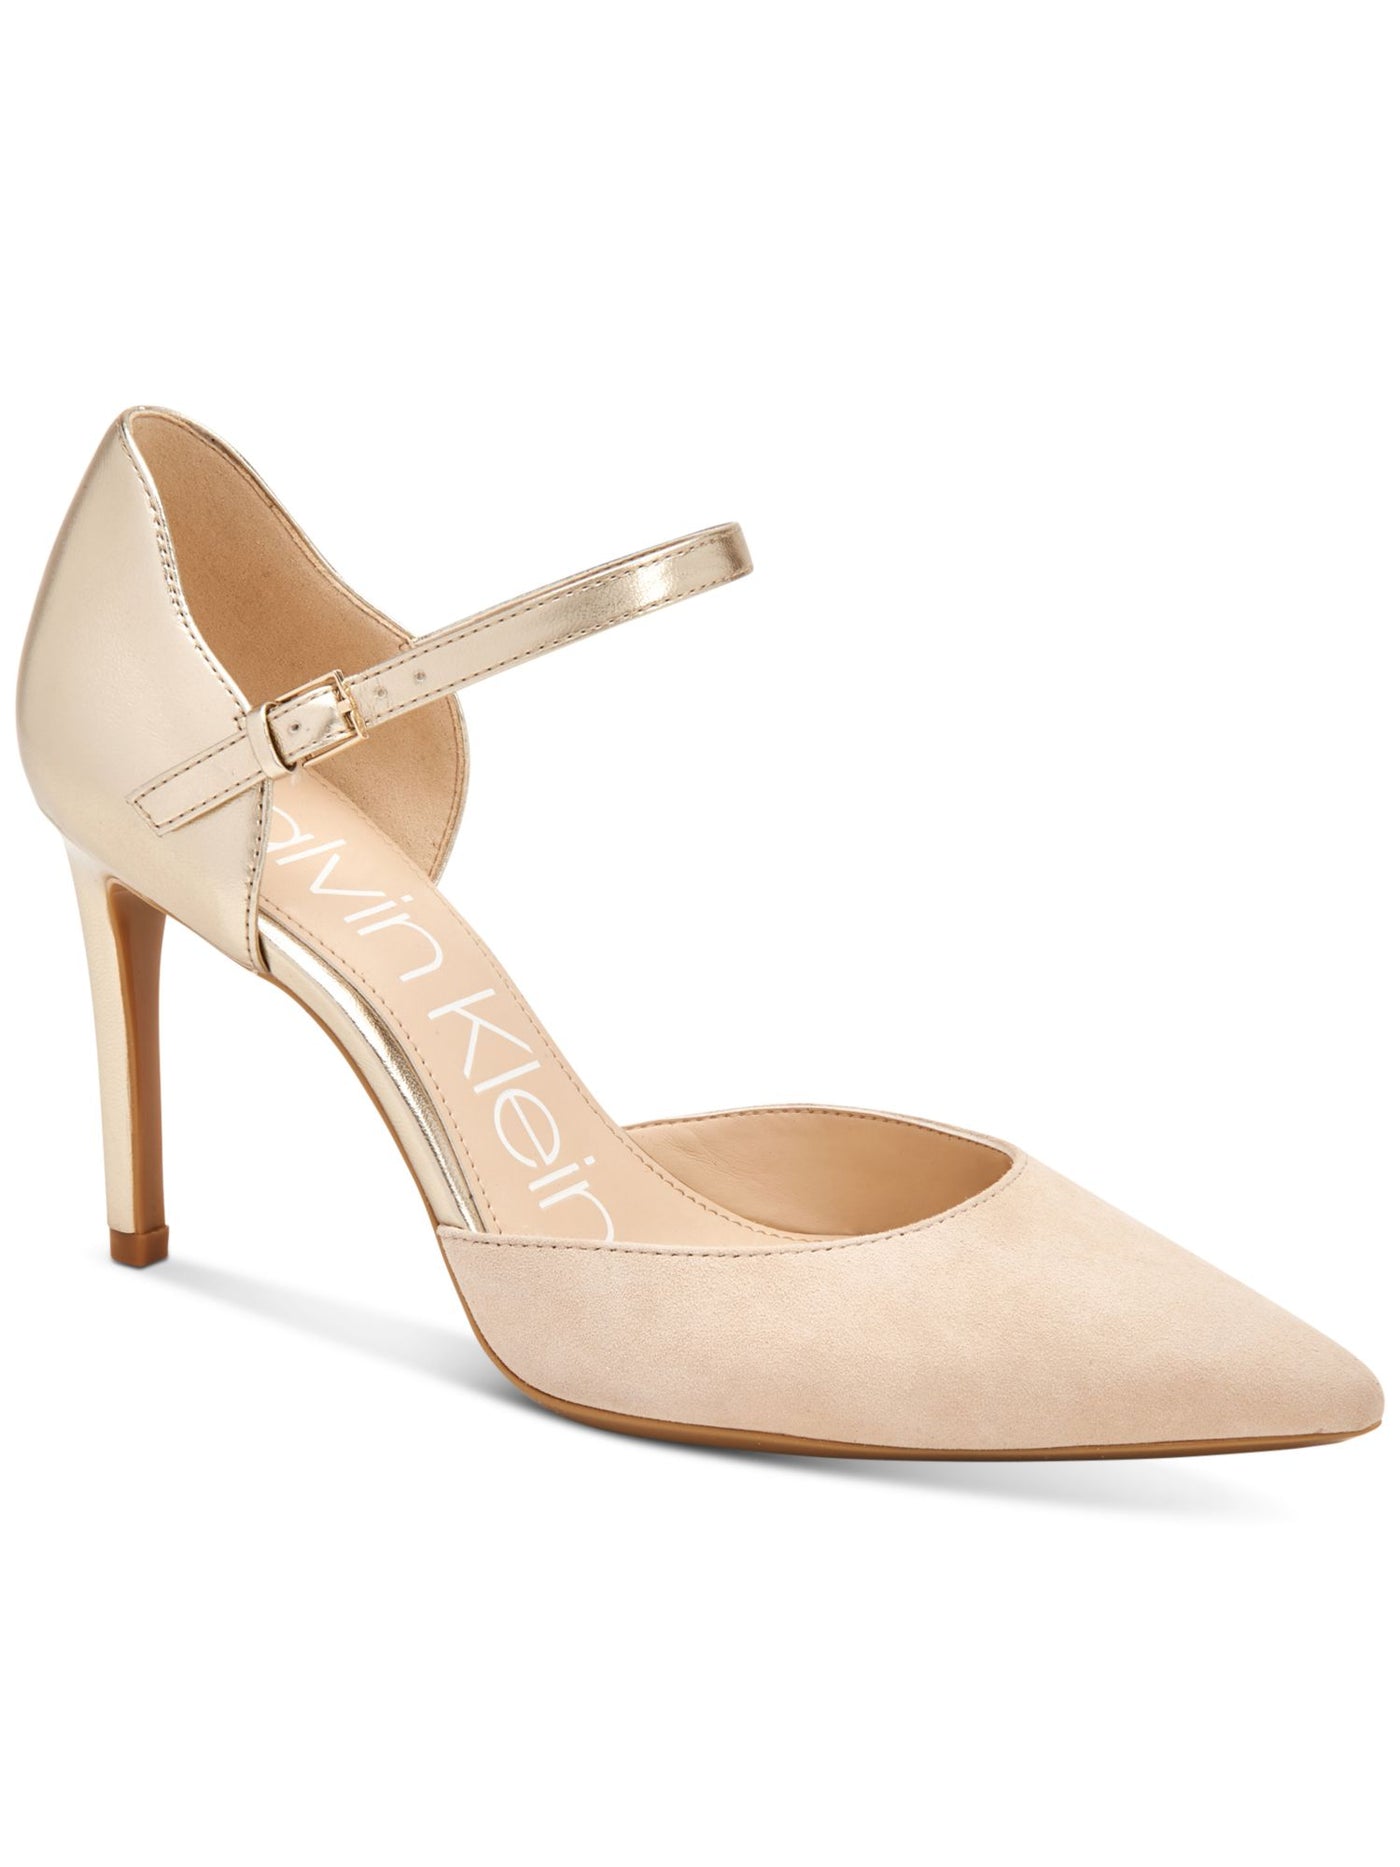 CALVIN KLEIN Womens Beige Gel Pod Insert D Orsay Ankle Strap Cushioned Roya Pointed Toe Stiletto Buckle Leather Dress Pumps Shoes 7.5